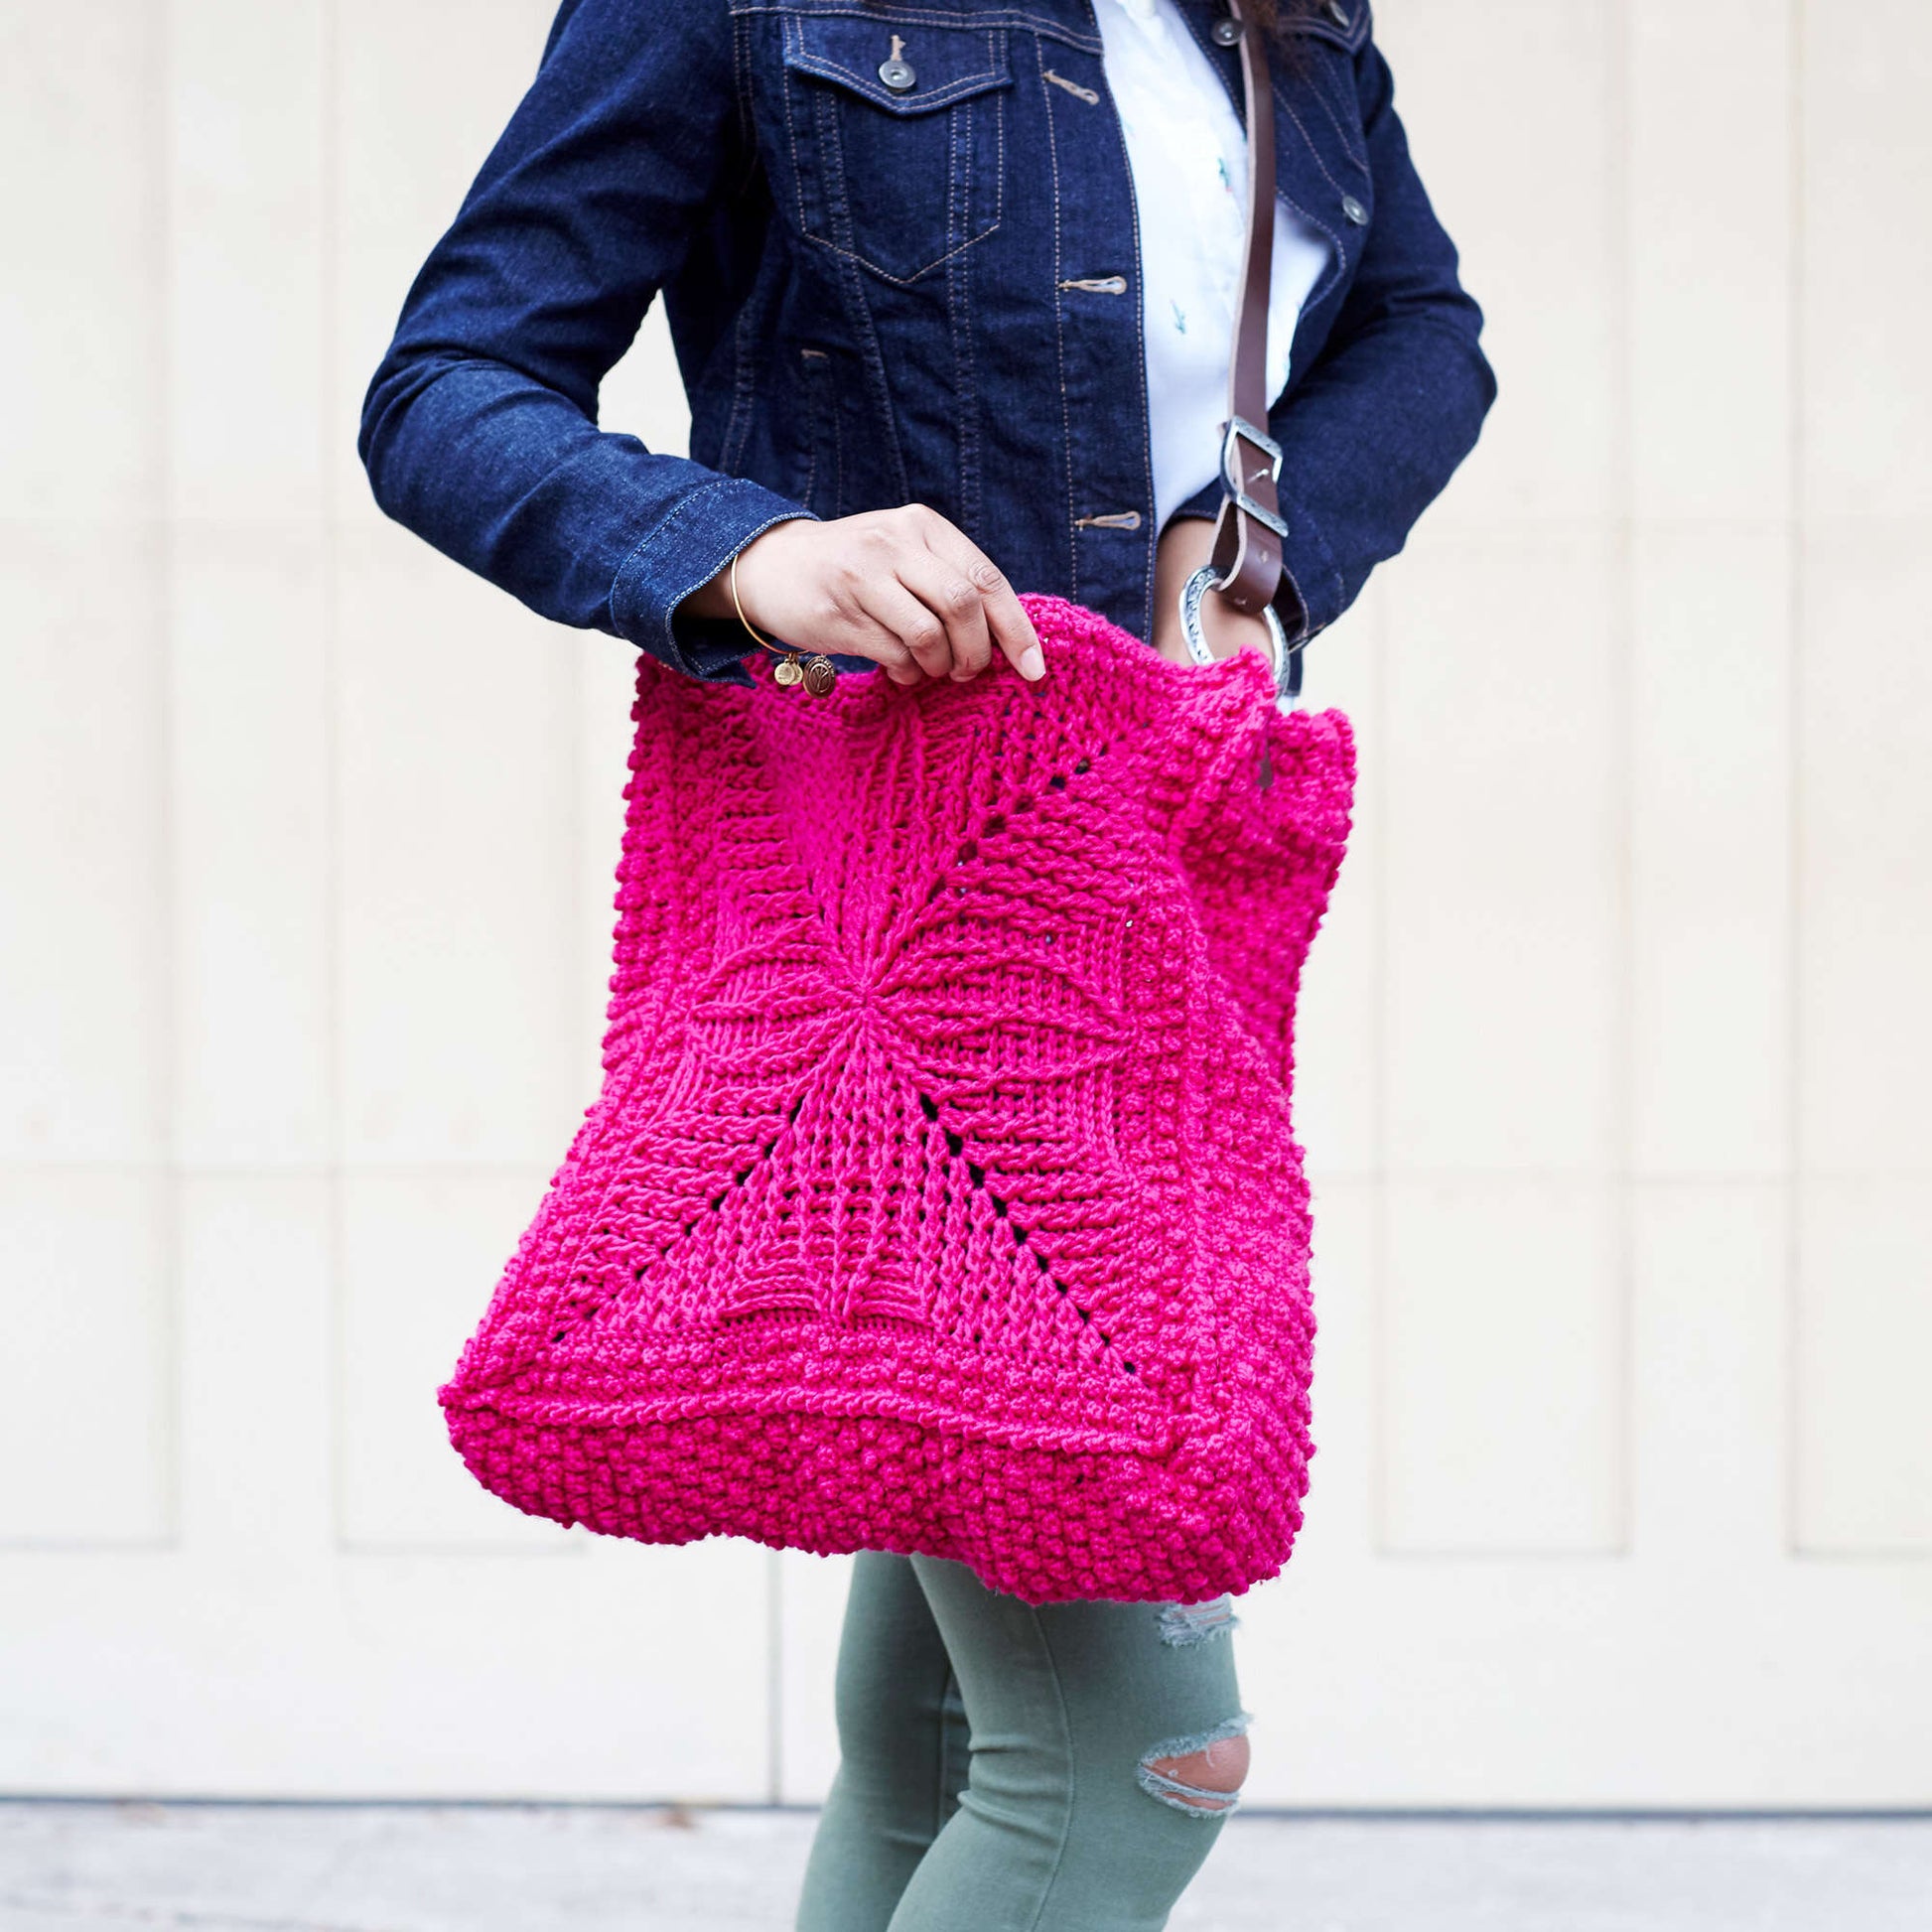 Free Red Heart Chic Carry-all Bag Crochet Pattern